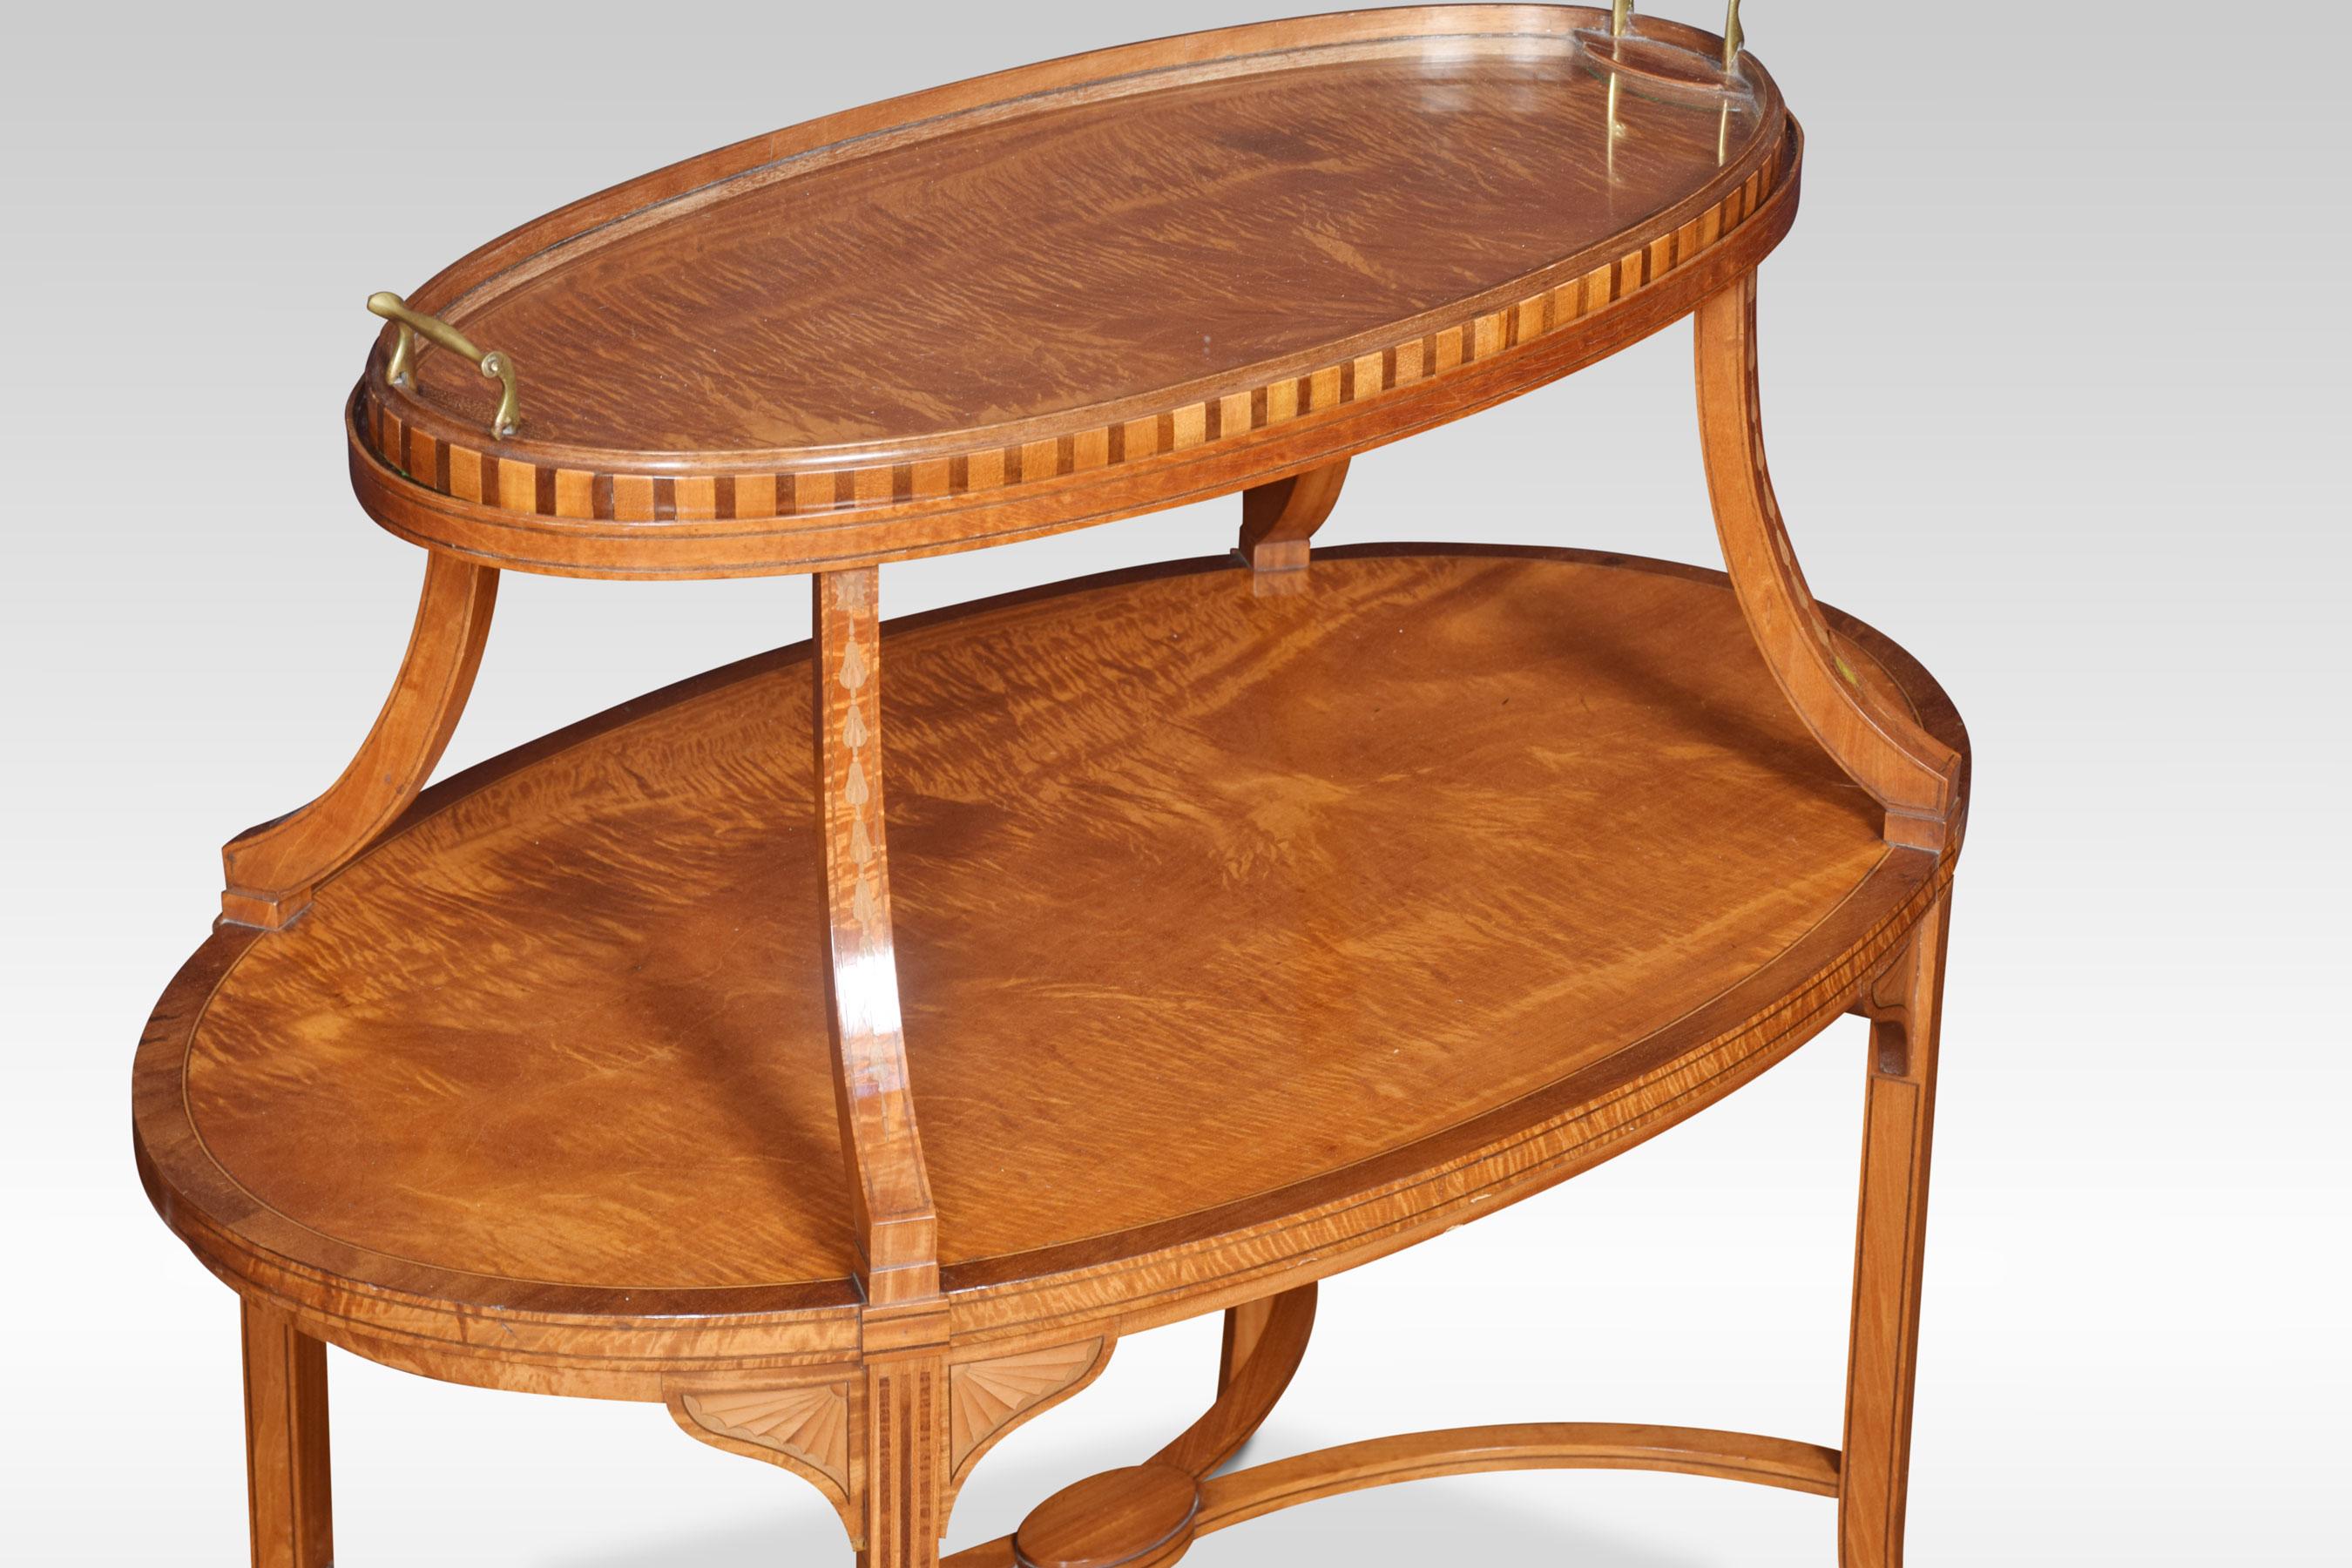 Satinwood and mahogany étagère, the top fitted with a removable oval glass-paneled tray, above under tier raised up on square block tapered and splayed legs, united by curved stretchers.
Dimensions:
Height 33 inches
Width 35 inches
Depth 22